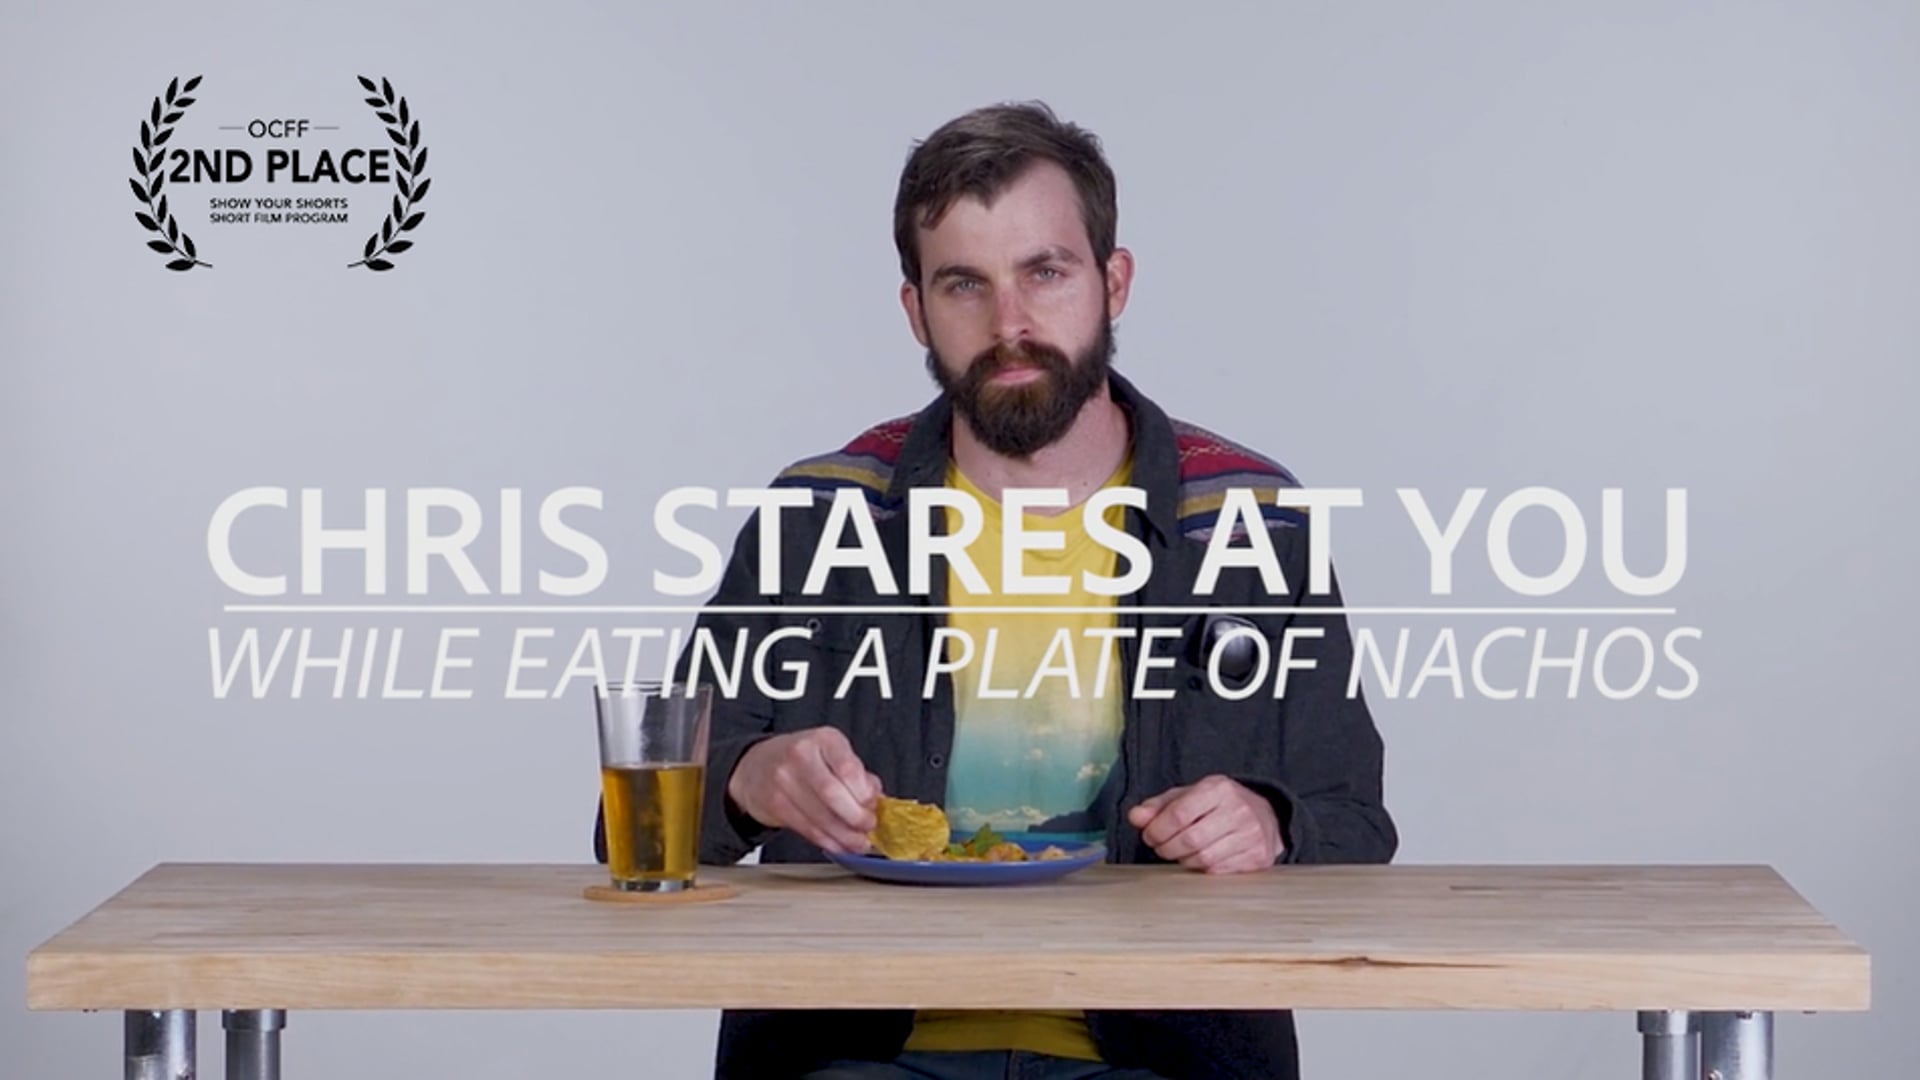 Chris Stares At You While Eating a Plate of Nachos | Short Film